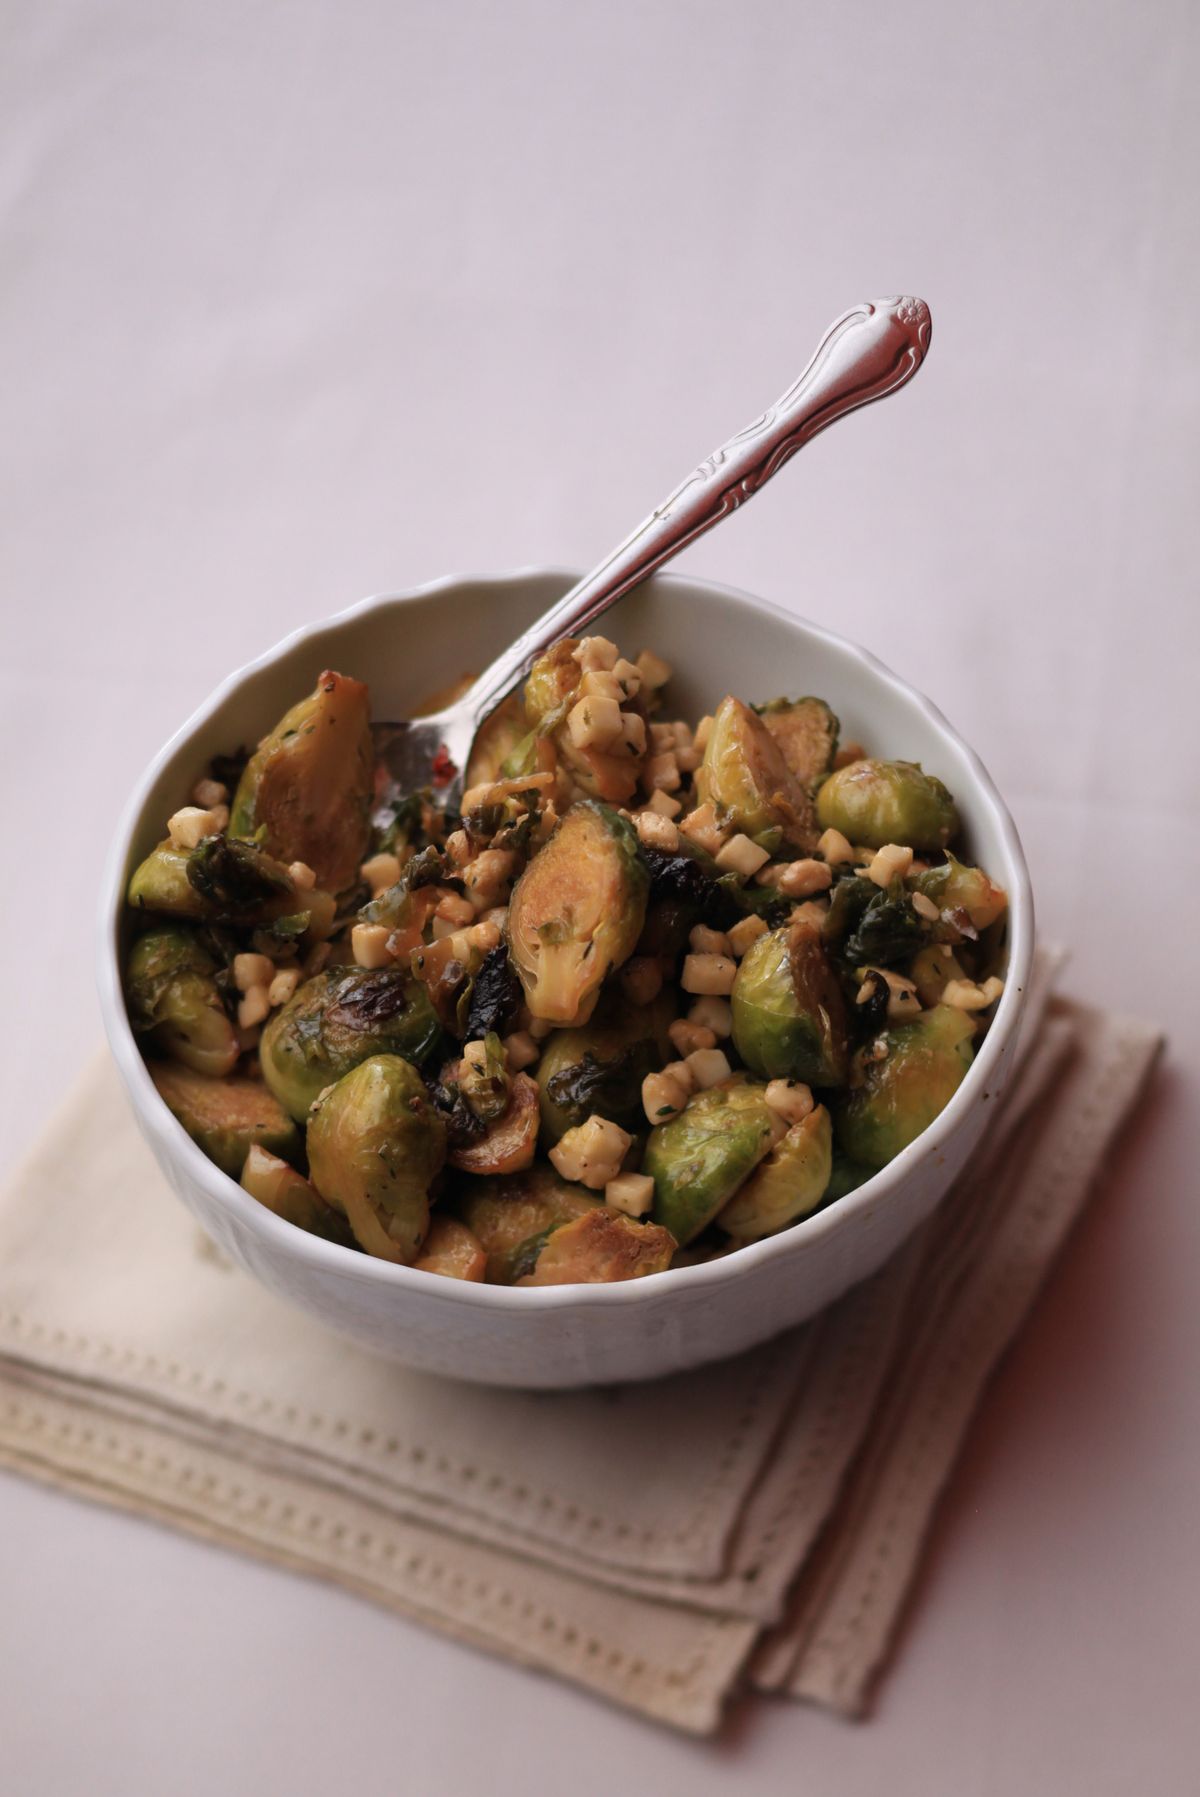 Brussels Sprouts with Pecorino and Thyme can be paired with an earthy roast Leg of Lamb with a Clementine Crust, and a wintry rigatoni pasta with beef and parsnip for a fantastic family meal.